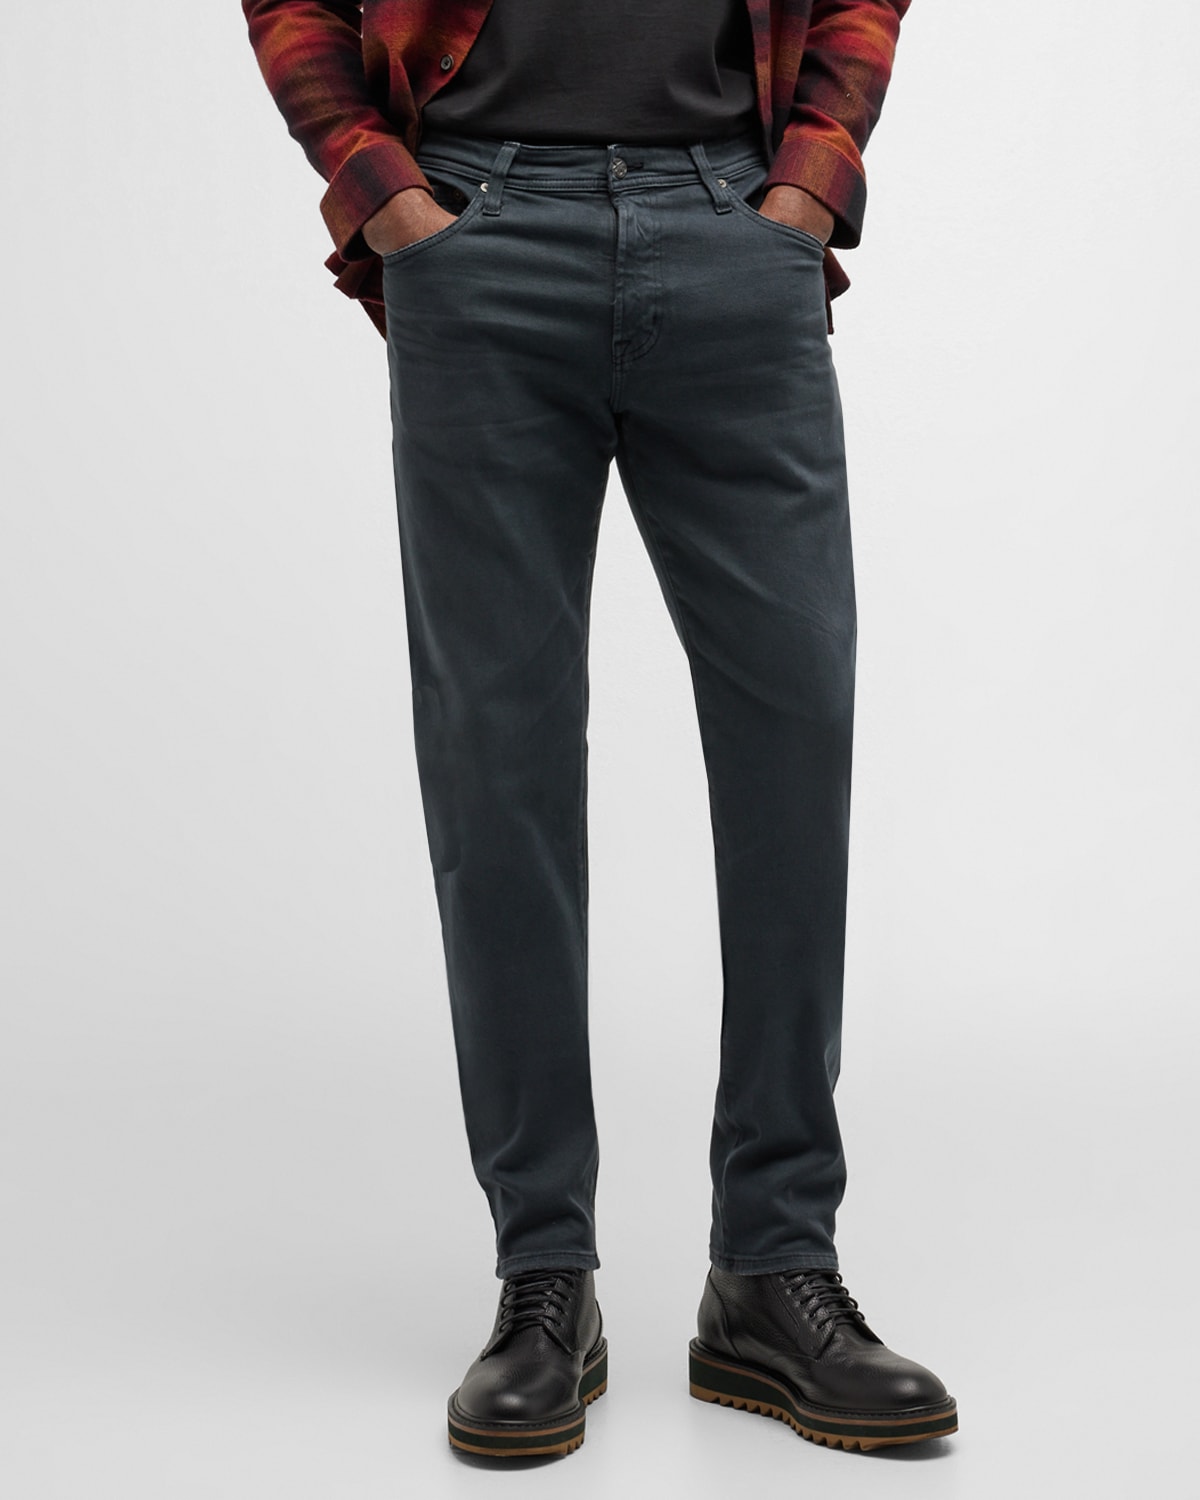 AG Adriano Goldschmied Men's Tellis Tapered Jeans